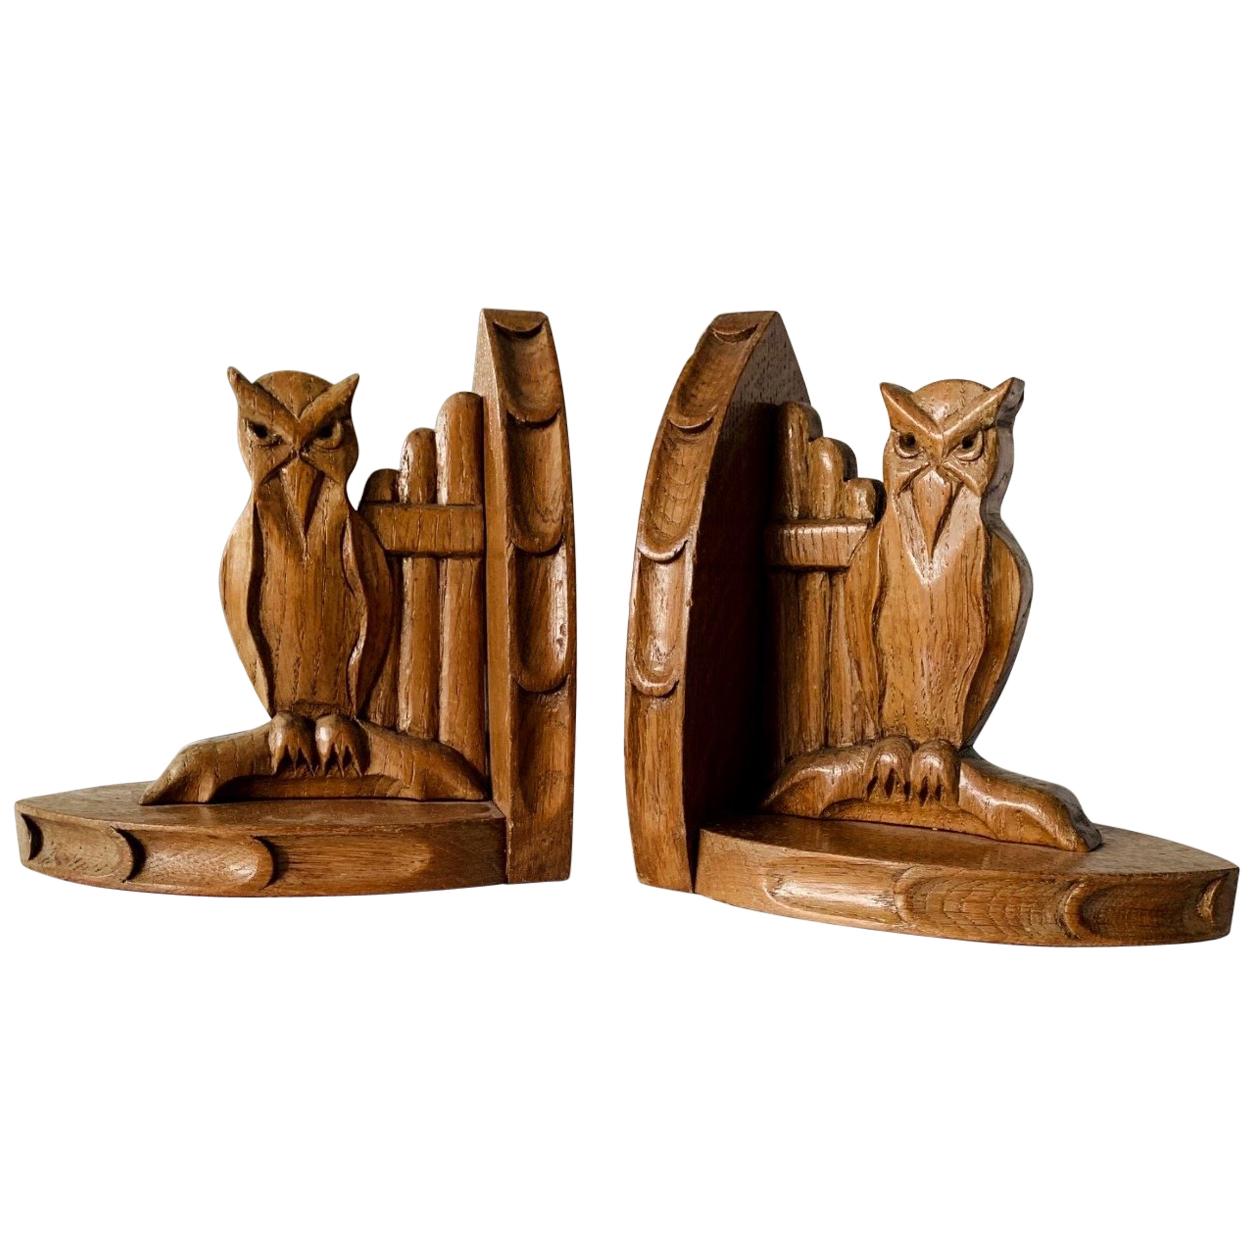 Early 20th Century Arts & Crafts Period Gothic Revival Owl Bookends / Stand